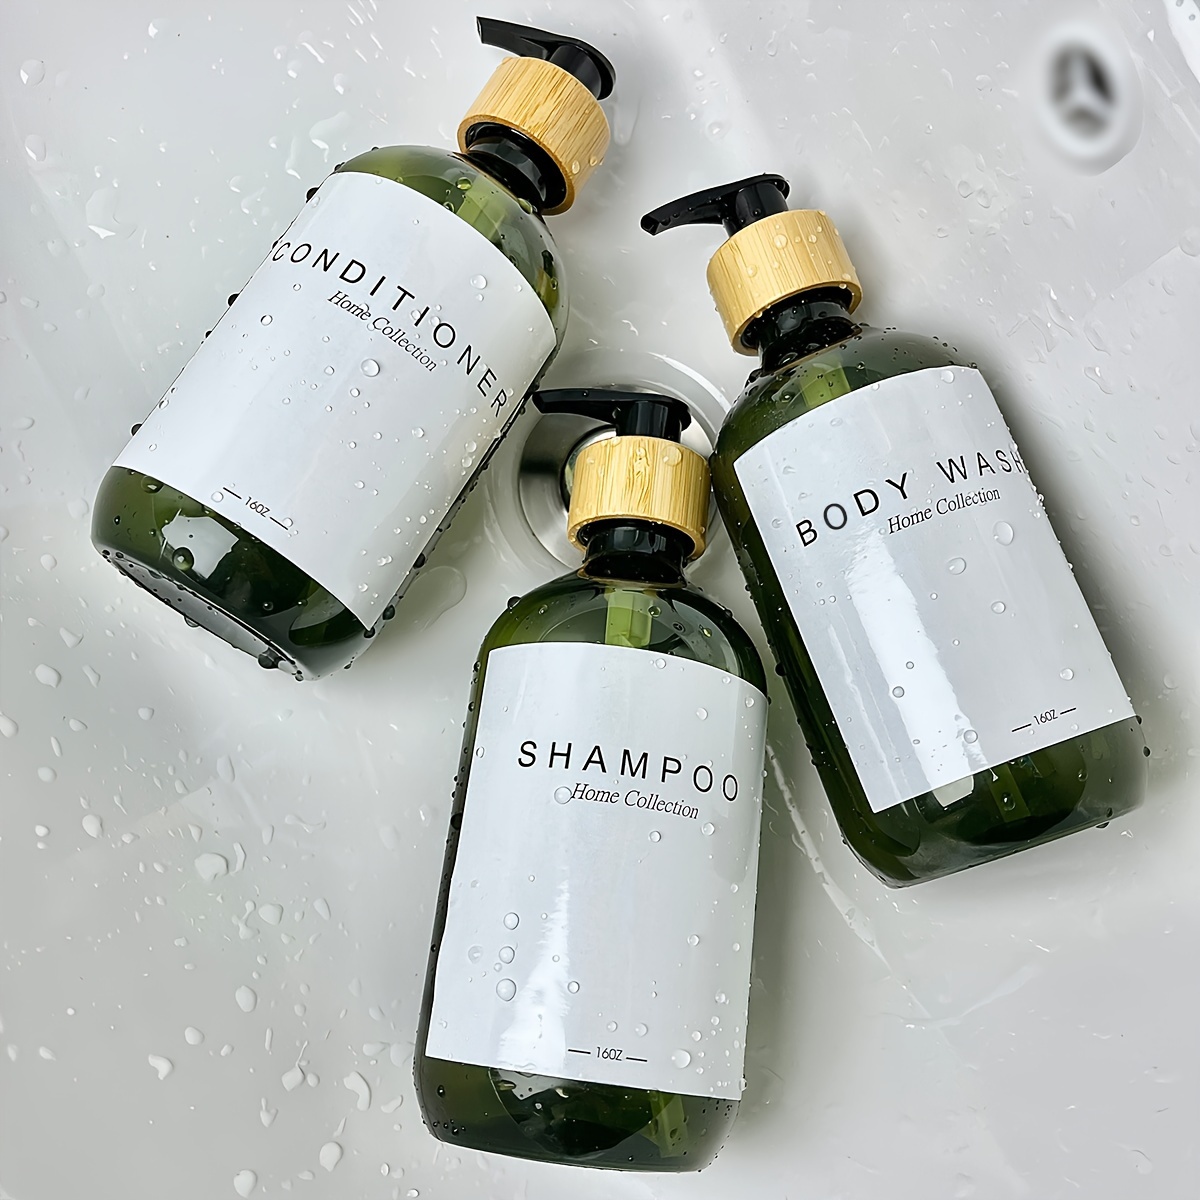 

3pcs Bathroom Soap Dispenser Set, 500ml Amber Pump Bottles With Waterproof Labels For Shampoo, Conditioner, Body Wash